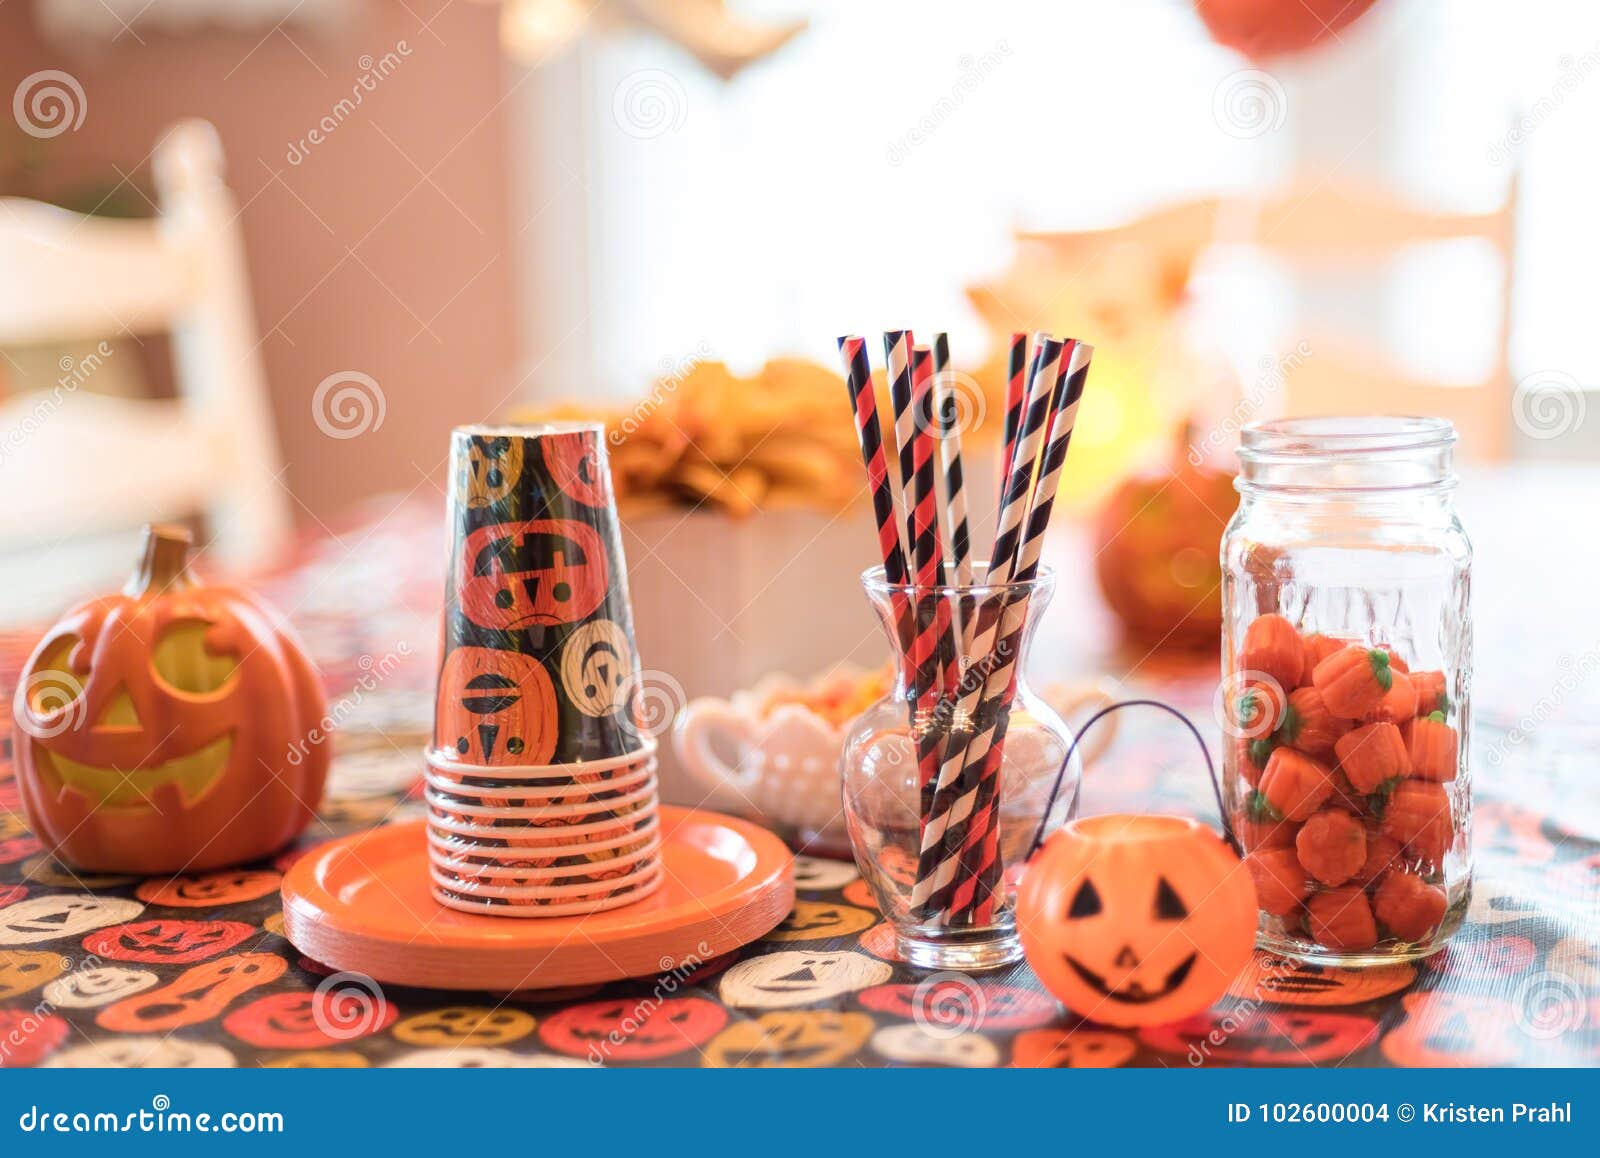 Halloween party supplies stock photo. Image of holiday - 102600004